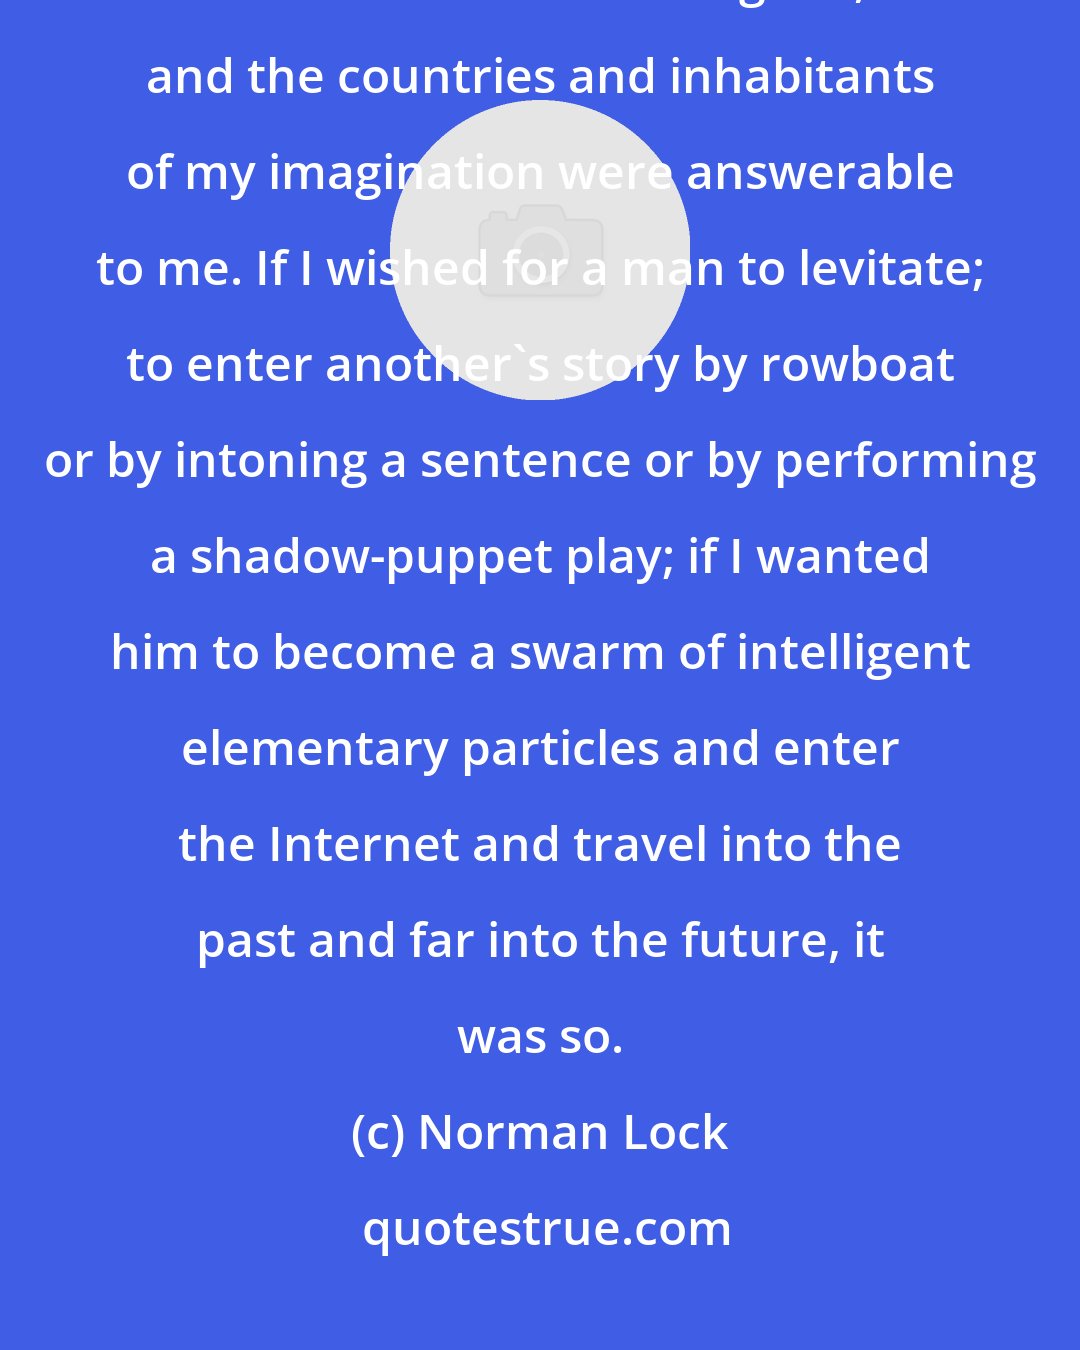 Norman Lock: My fictional worlds were those of a fabulist, of an intellectual fantasist. I was the lawgiver, and the countries and inhabitants of my imagination were answerable to me. If I wished for a man to levitate; to enter another's story by rowboat or by intoning a sentence or by performing a shadow-puppet play; if I wanted him to become a swarm of intelligent elementary particles and enter the Internet and travel into the past and far into the future, it was so.